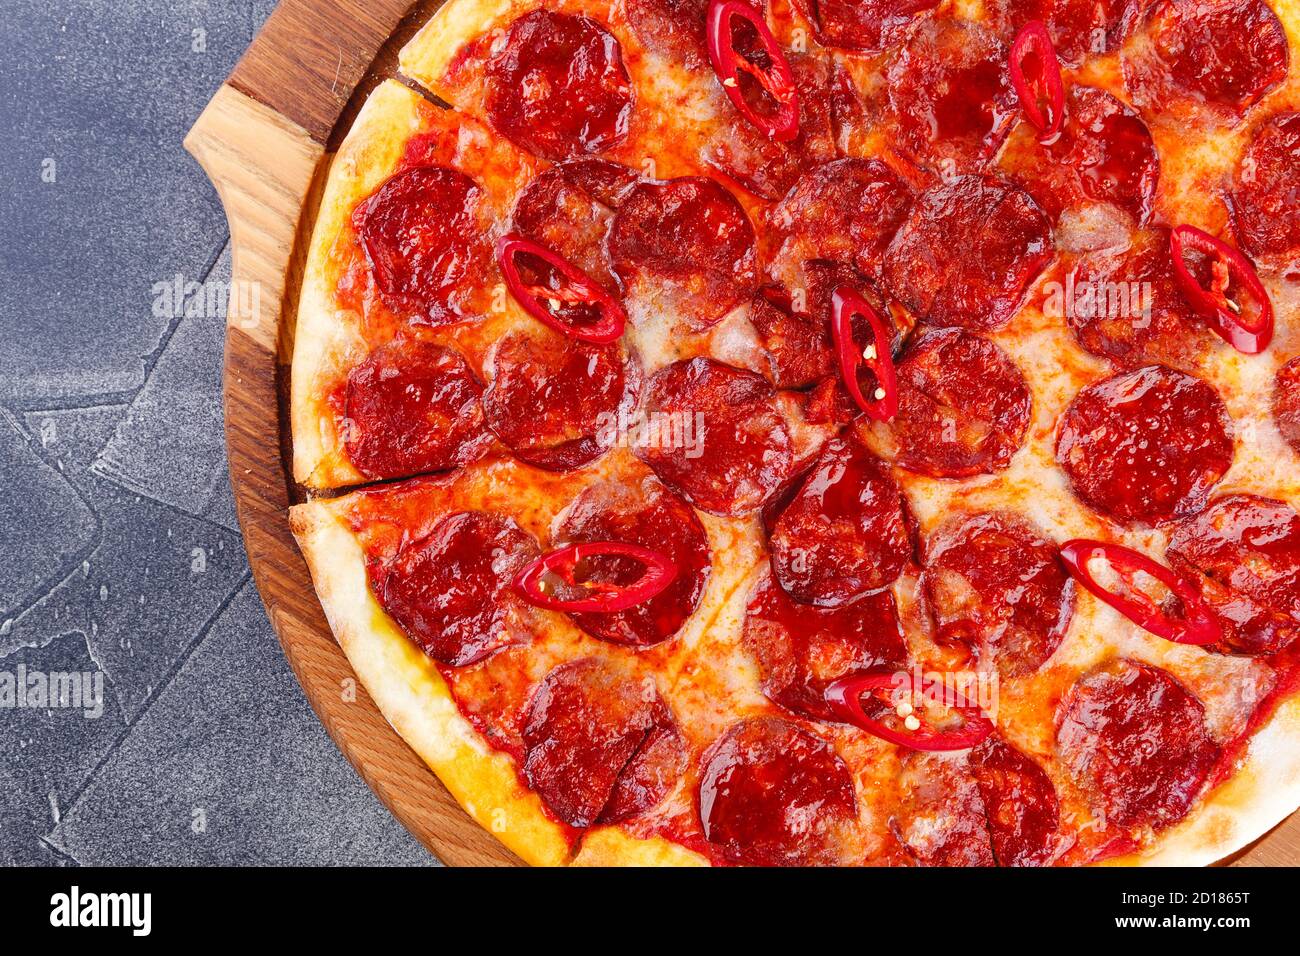 Pepperoni pizza on wooden board on a dark background. Close-up Stock Photo